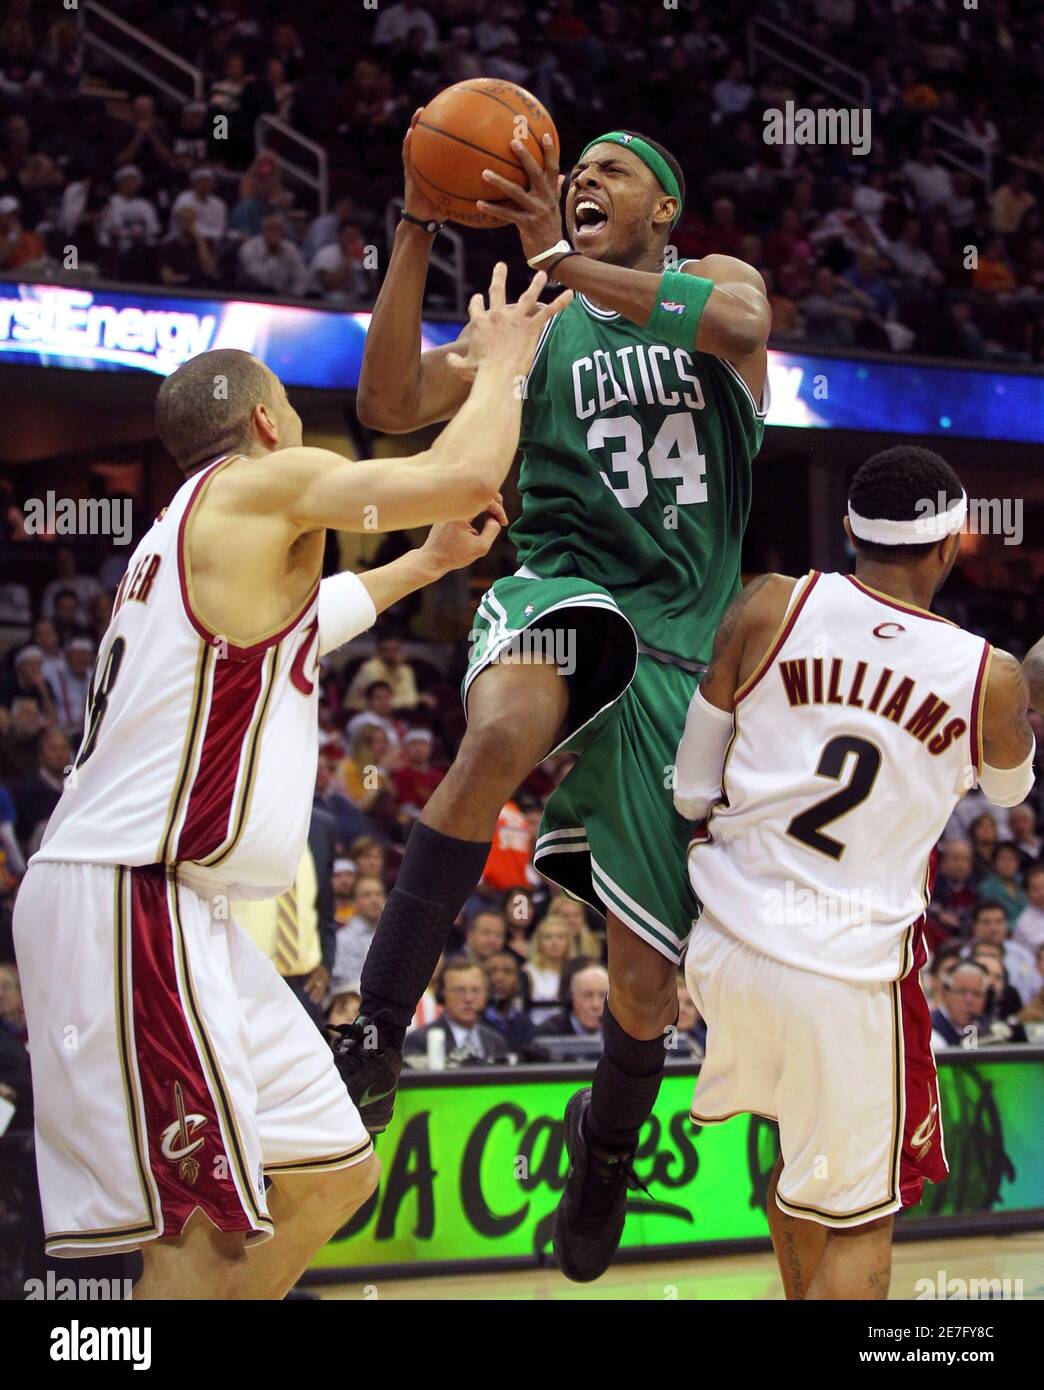 Boston Celtics' Paul Pierce (C) drives to the net between Cleveland Cavaliers' Anthony Parker and Mo Williams (R) during the fourth quarter in Game 5 of their NBA Eastern Conference playoff basketball series in Cleveland, May 11, 2010. REUTERS/Aaron Josefczyk (UNITED STATES - Tags: SPORT BASKETBALL) Stock Photo